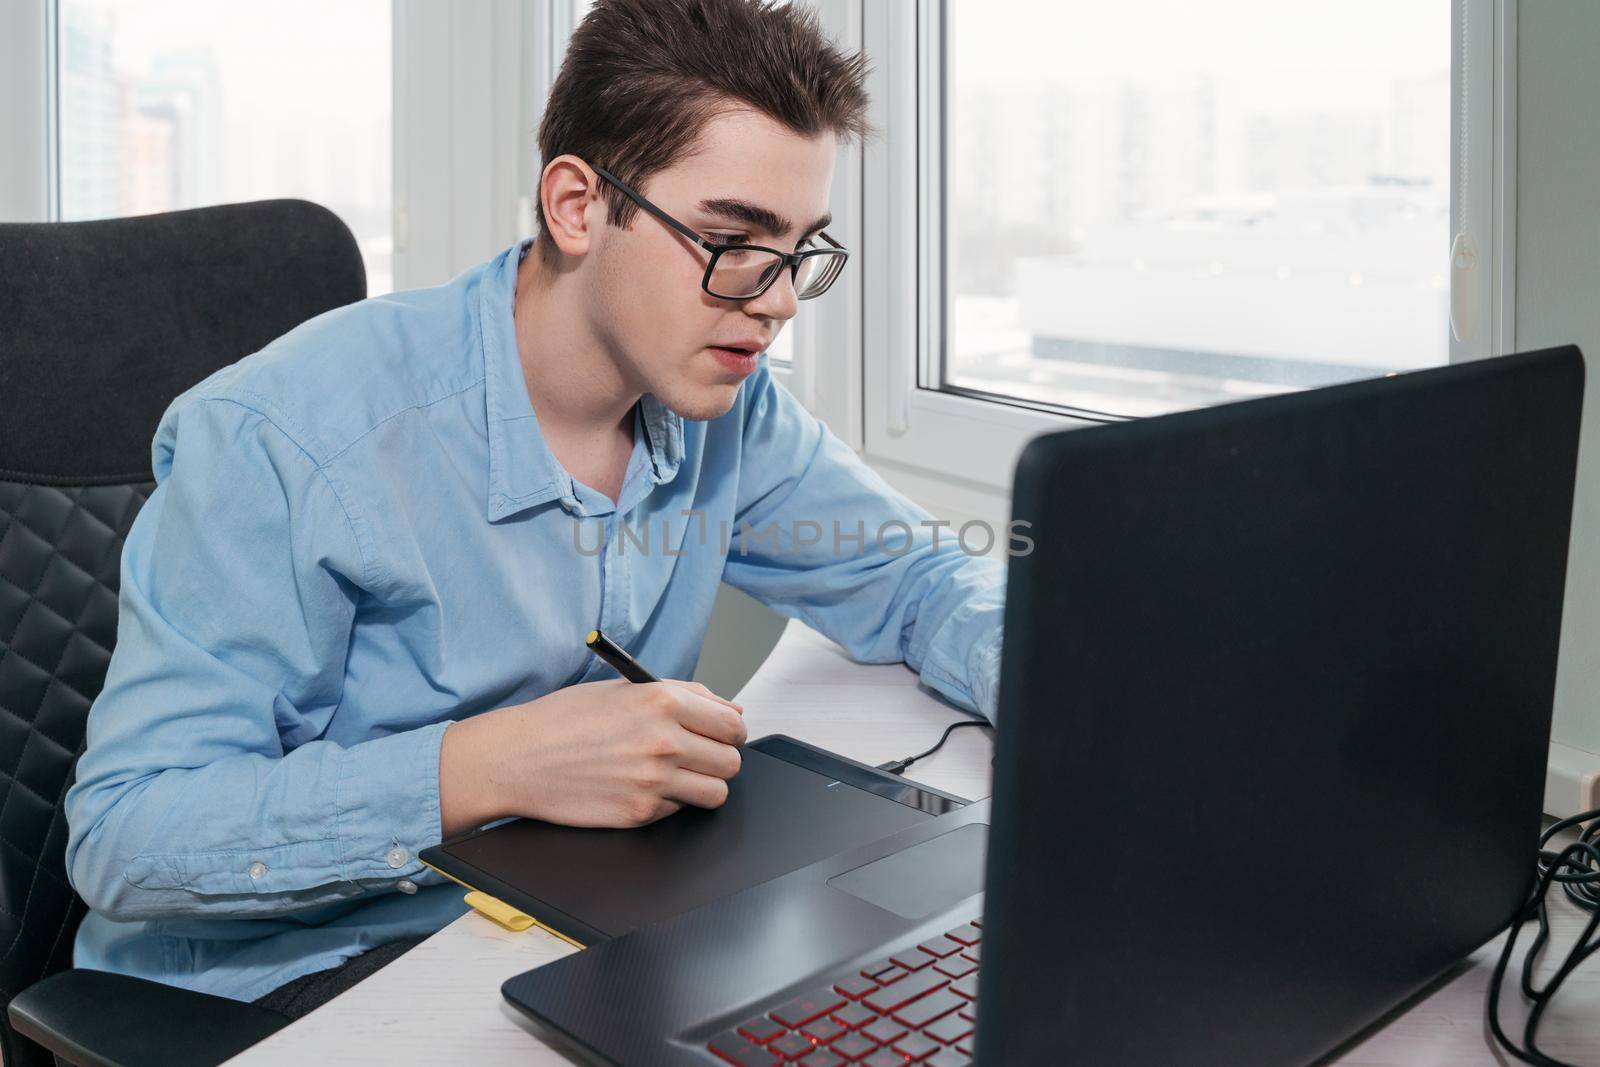 Man freelancer is working using laptop computer and graphics tablet at home office. Freelance lifestyle workplace